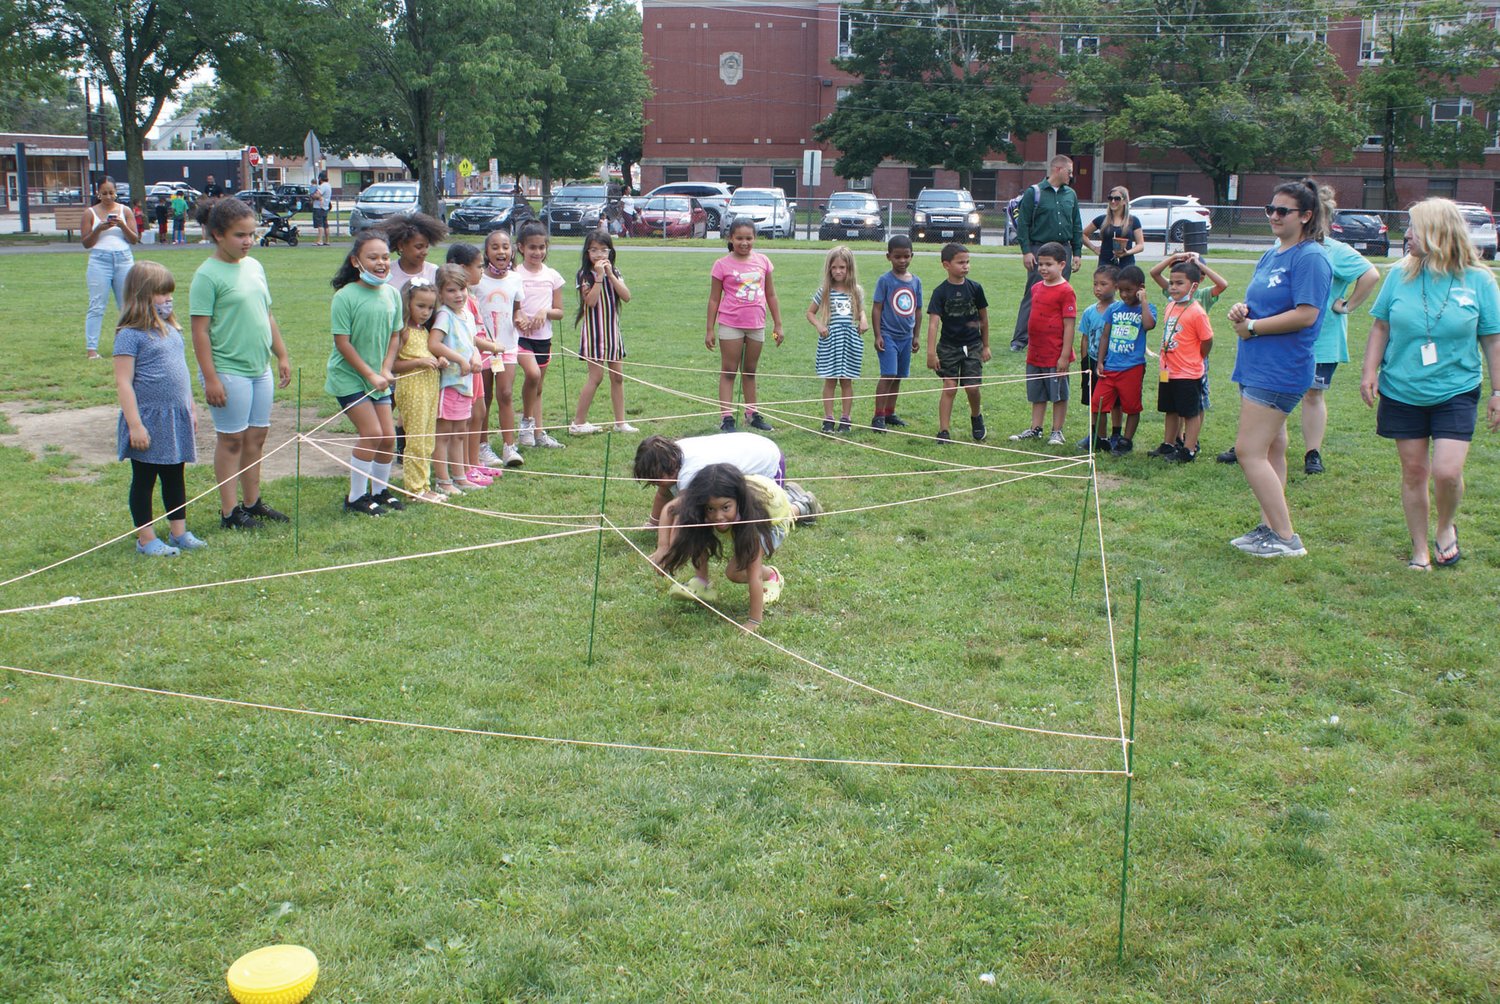 HANDLING OBSTACLES: Learning how to handle obstacles in life is just one lesson learned in summer camp. Students were challenged to an obstacle course during Kidpalooza celebration, marking an end to the six-week summer Camp XL program.  